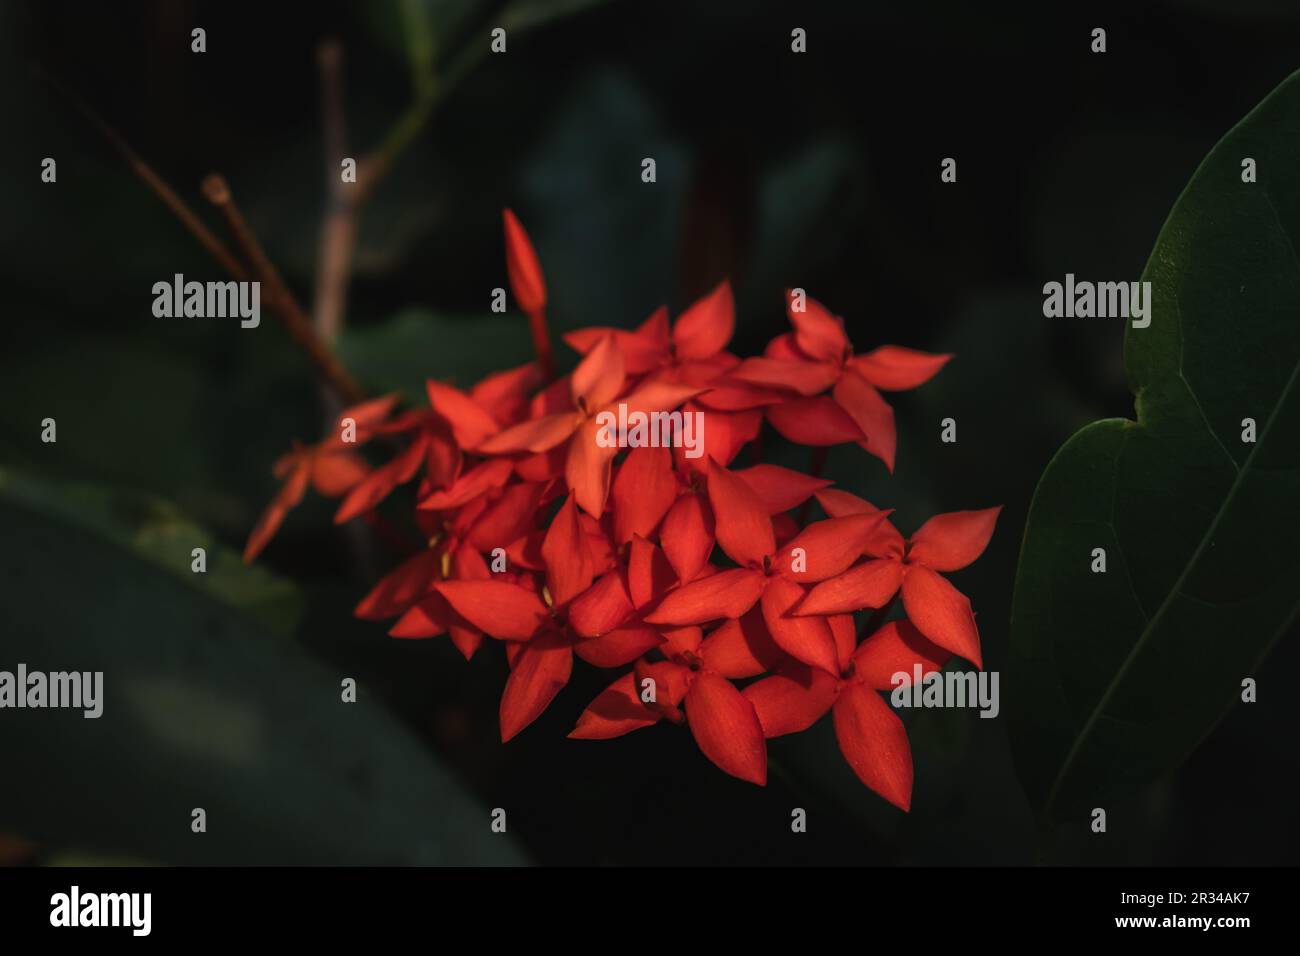 Ixora coccinea is a species of flowering plant in the Rubiaceae family. Stock Photo